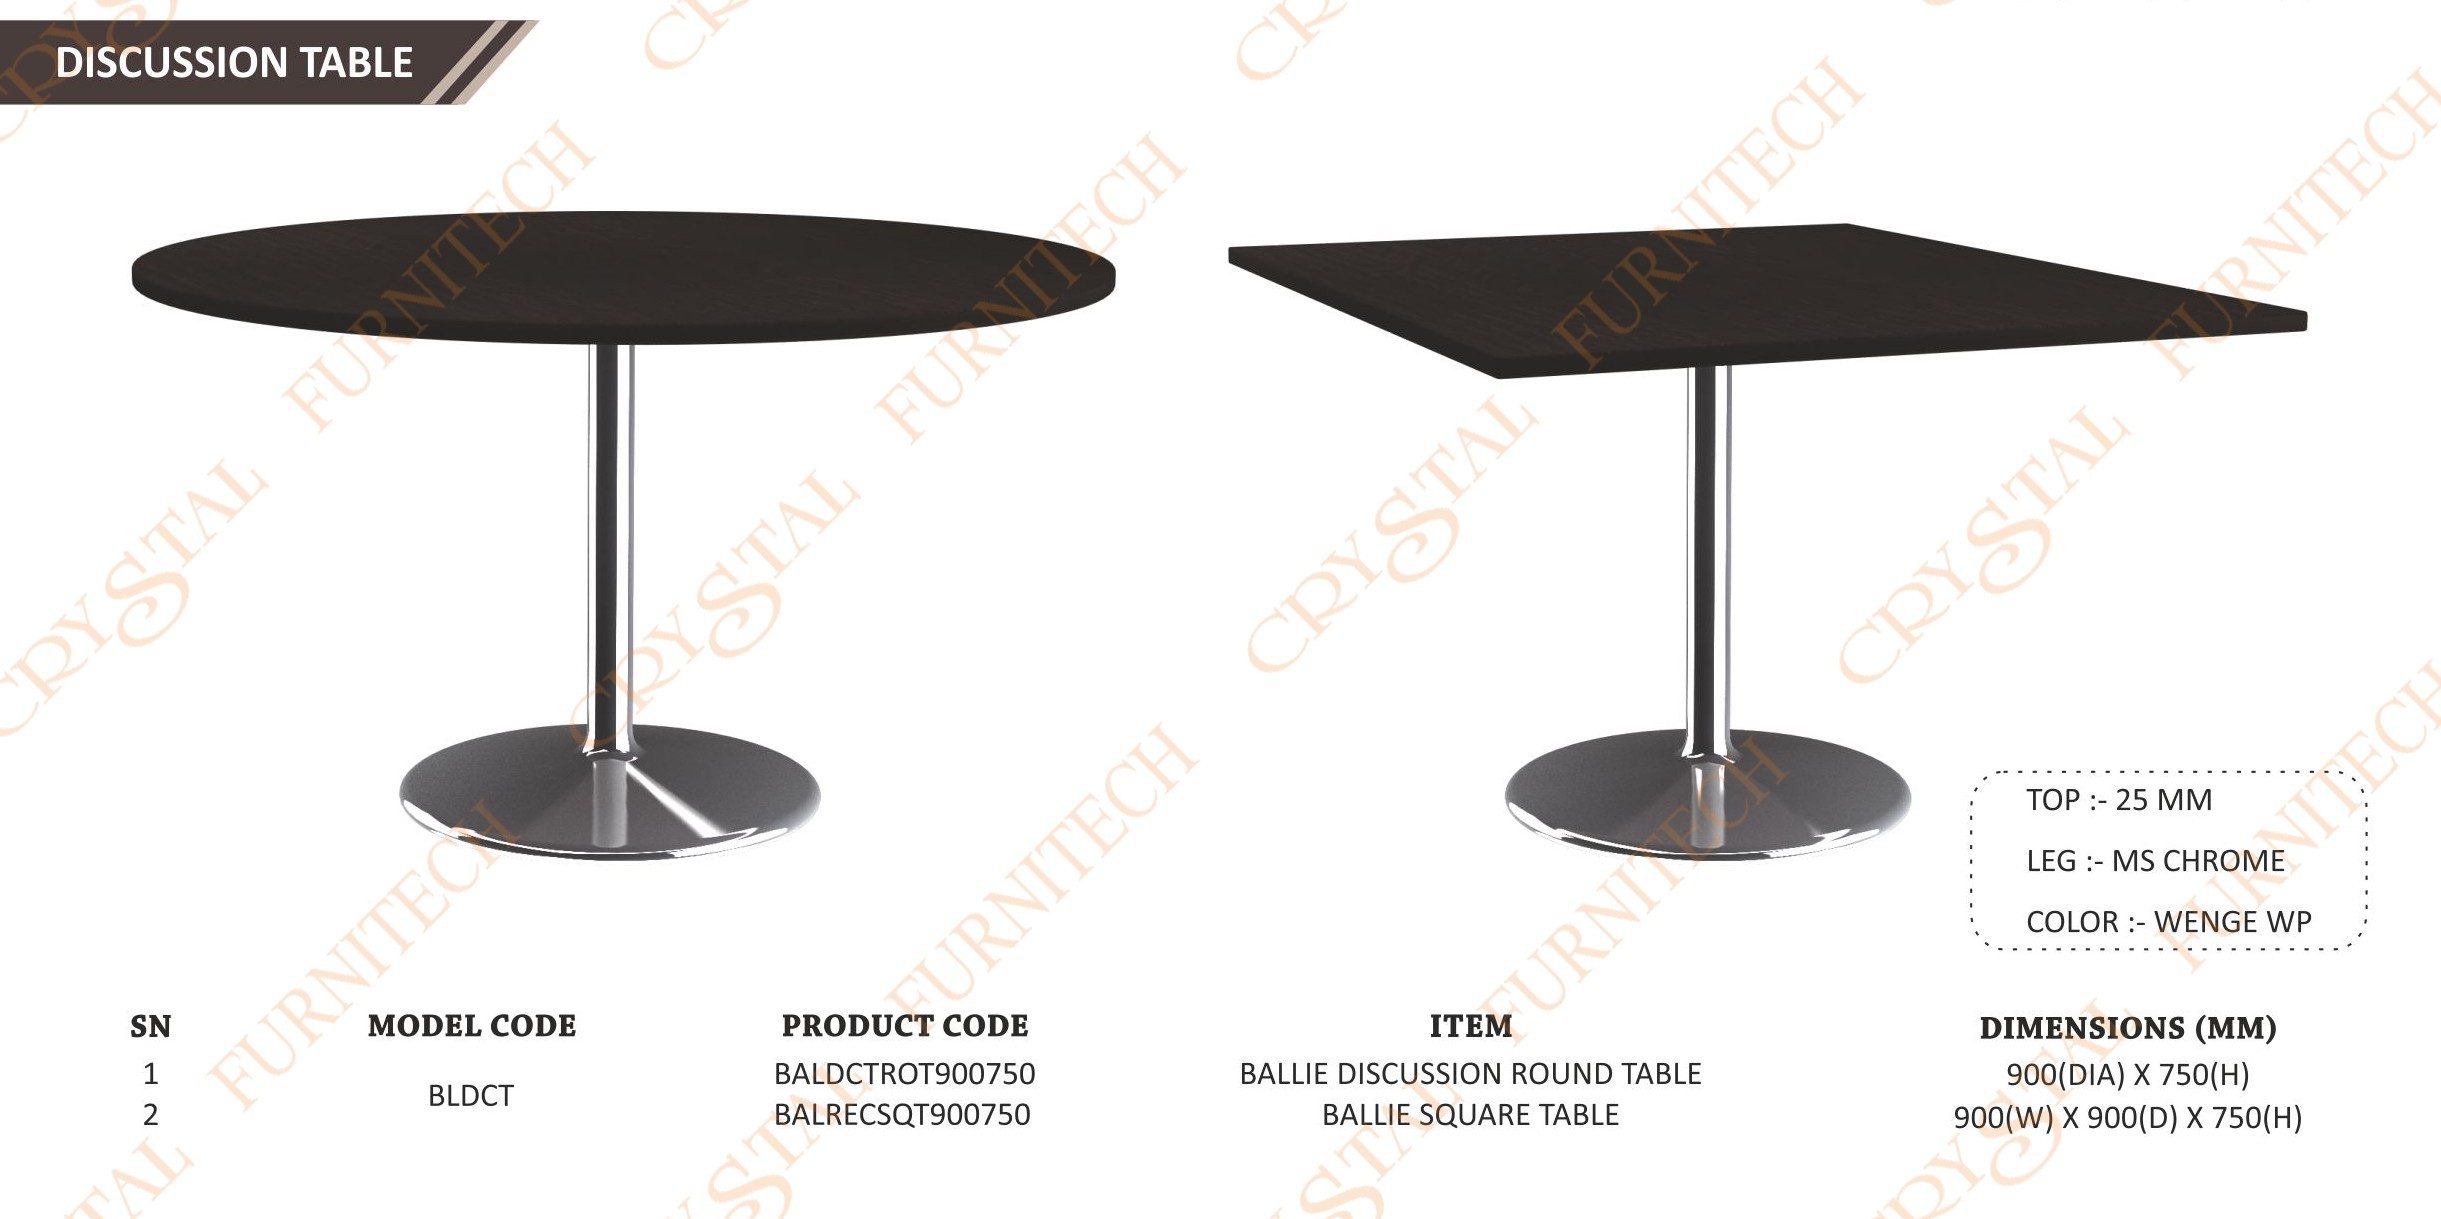 images/products/Office-Furniture-DISCUSSION-TABLE_1657180118.jpg